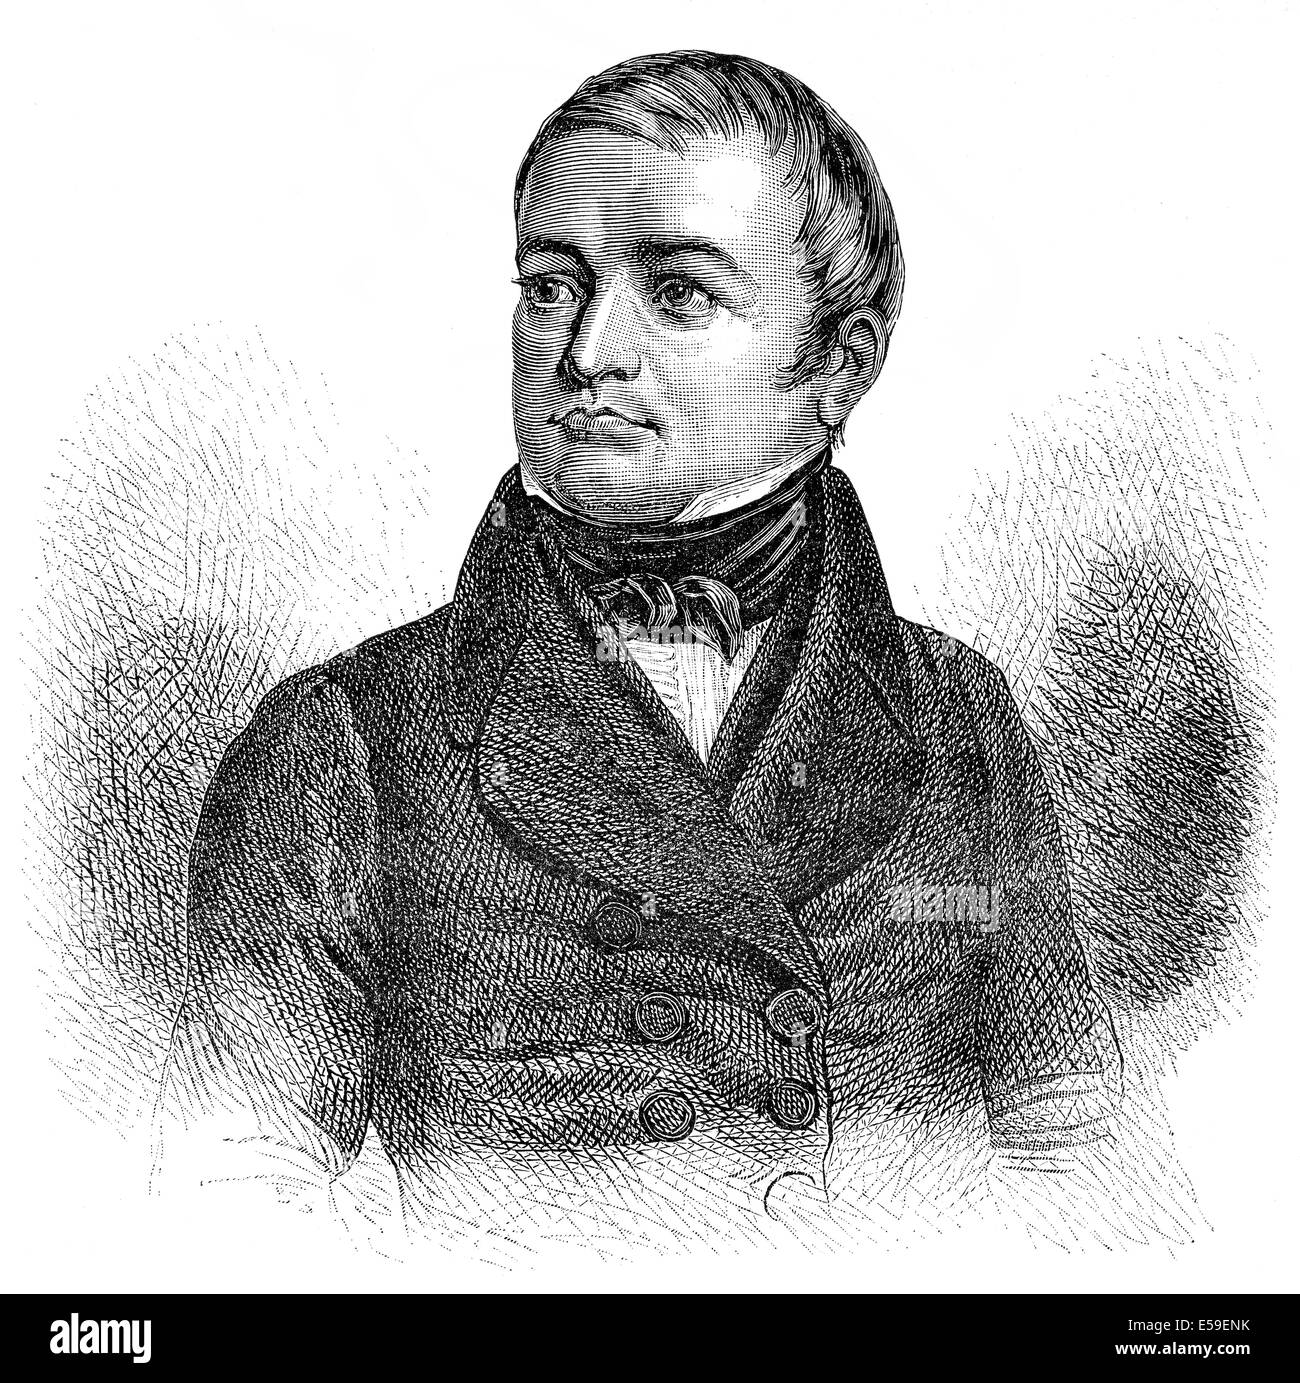 Louis Adolphe Thiers, 1797 - 1877, a French politician and historian, Louis Adolphe Thiers, 1797 - 1877, ein französischer Polit Stock Photo